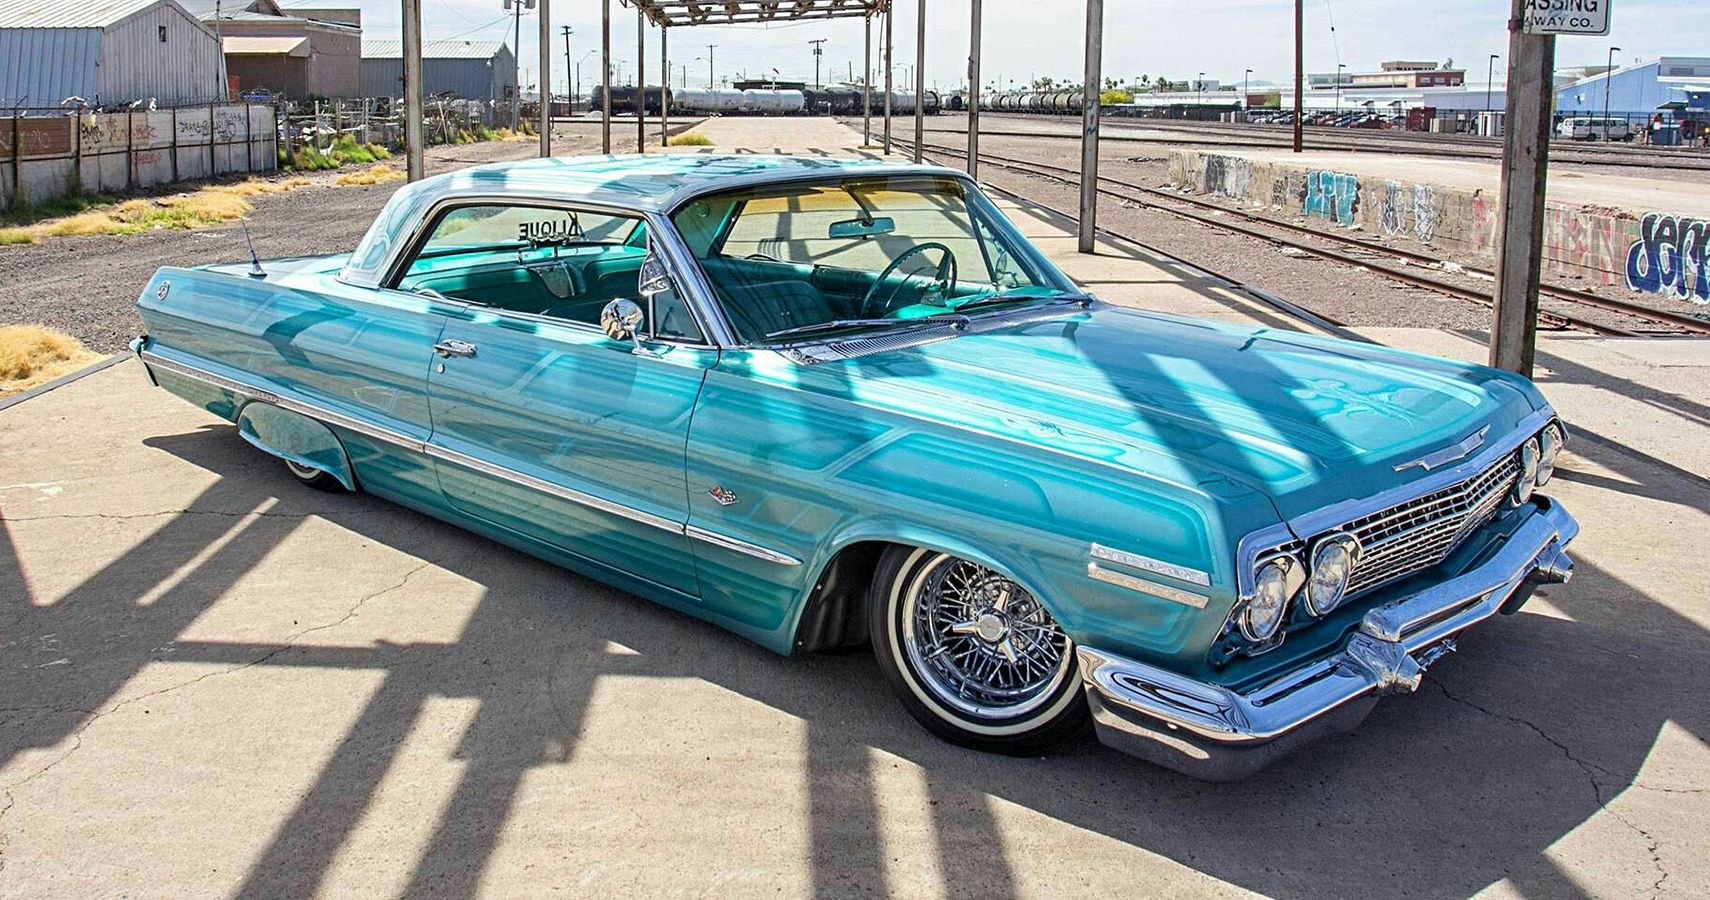 1963 Chevrolet Impala Lowrider: A Tale Of Love